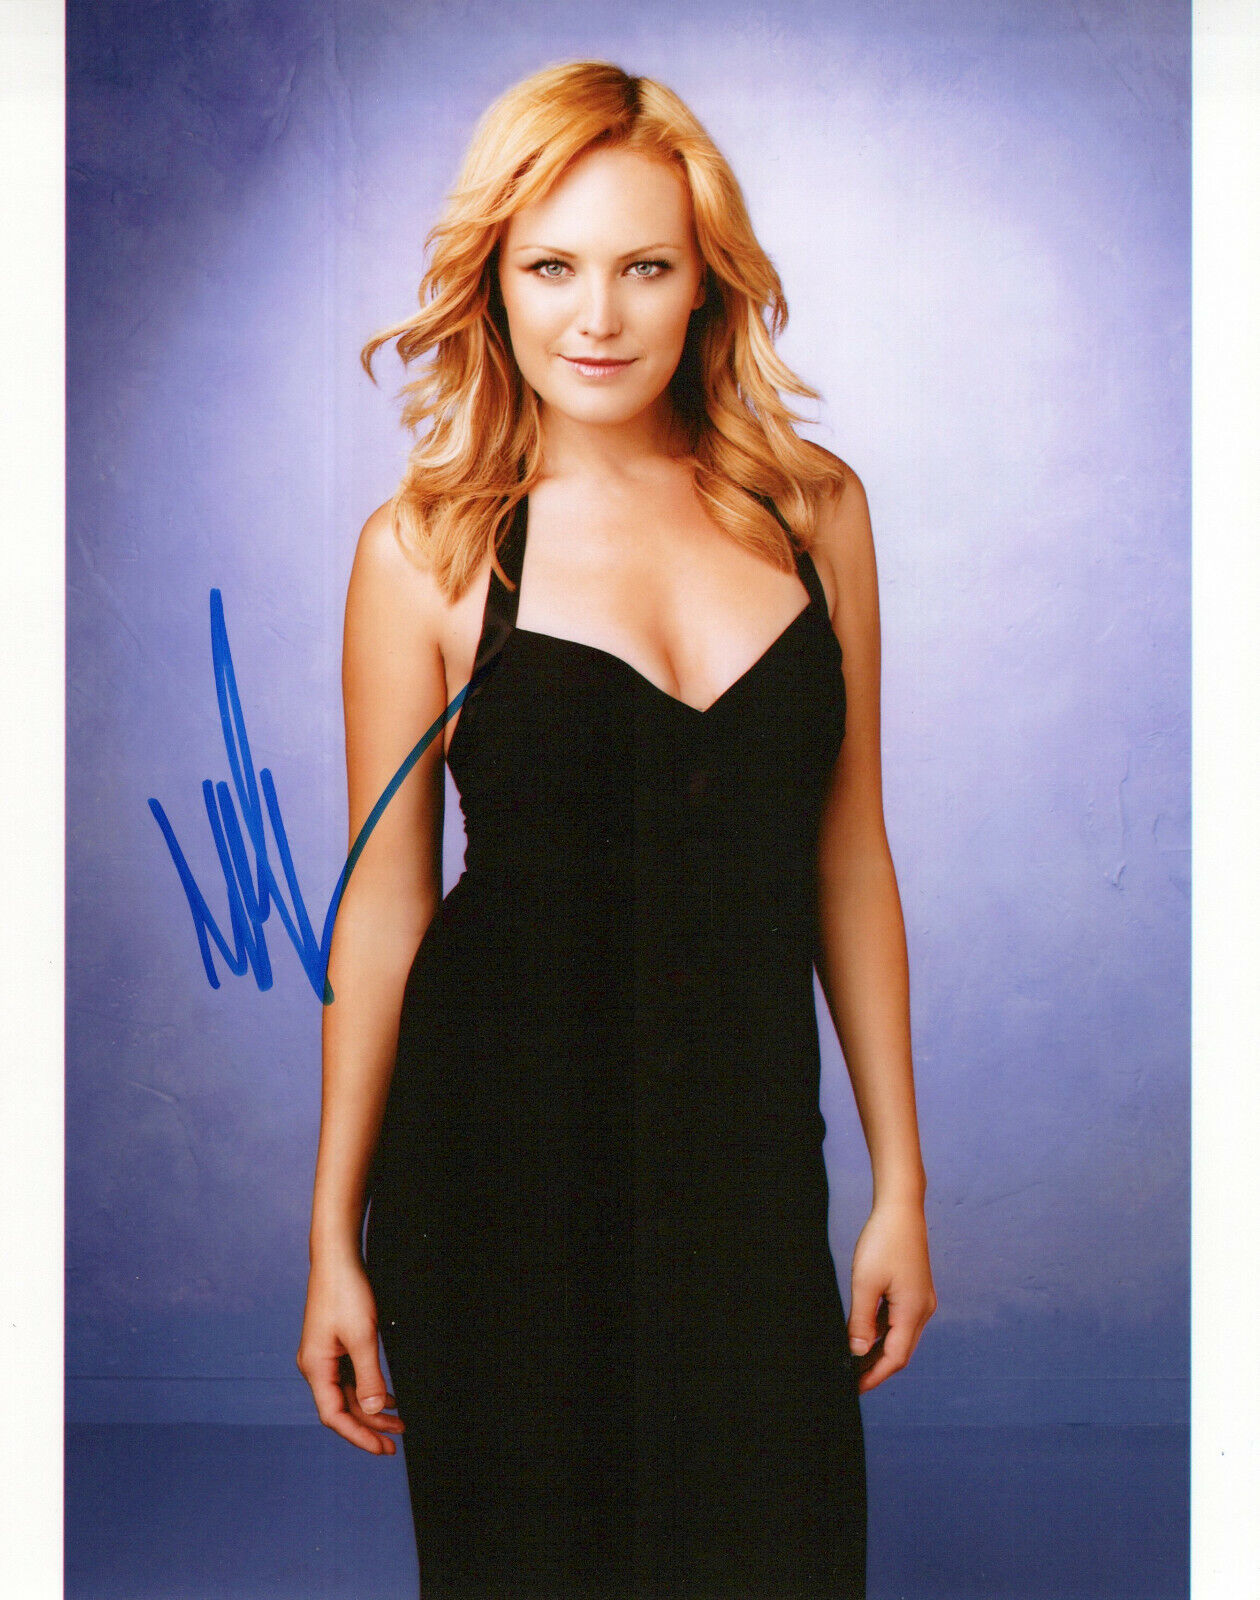 Malin Akerman glamour shot autographed Photo Poster painting signed 8x10 #10